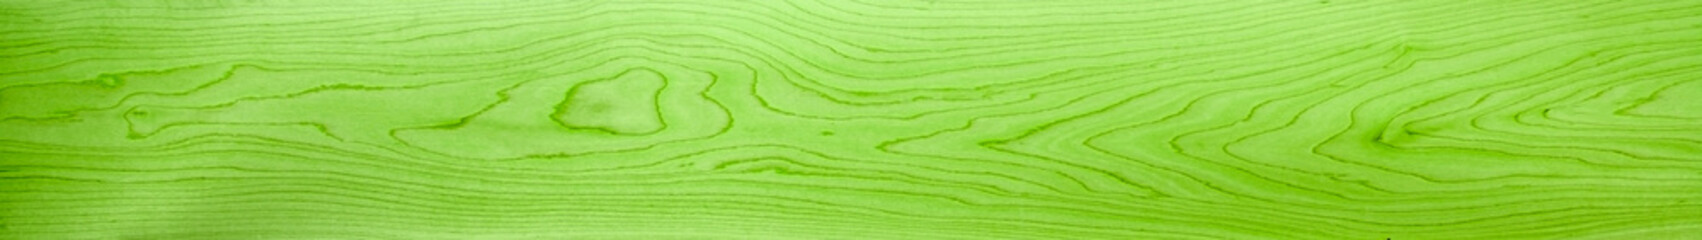 Green wood panorama for banners, design, backdrops and headers - with abstract grain patterns, in a wooden background texture.